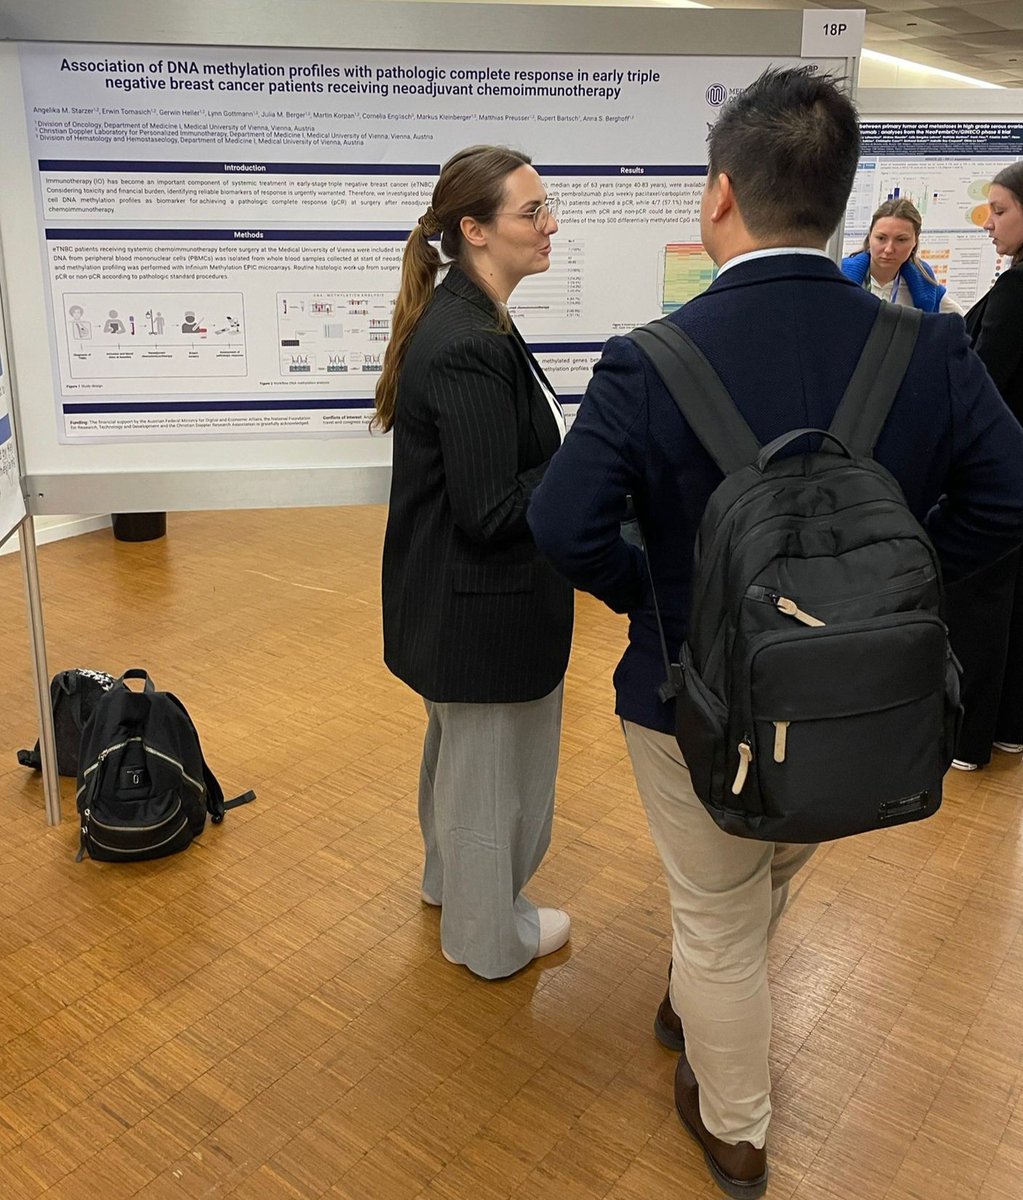 Submitting a poster to #ESMOImmuno23 is a great opportunity for Young Oncologist to showcase their work in IO field, interact with many accessible KOL on site, get feedback, and find potential collaborations. @myESMO #ESMOYOC